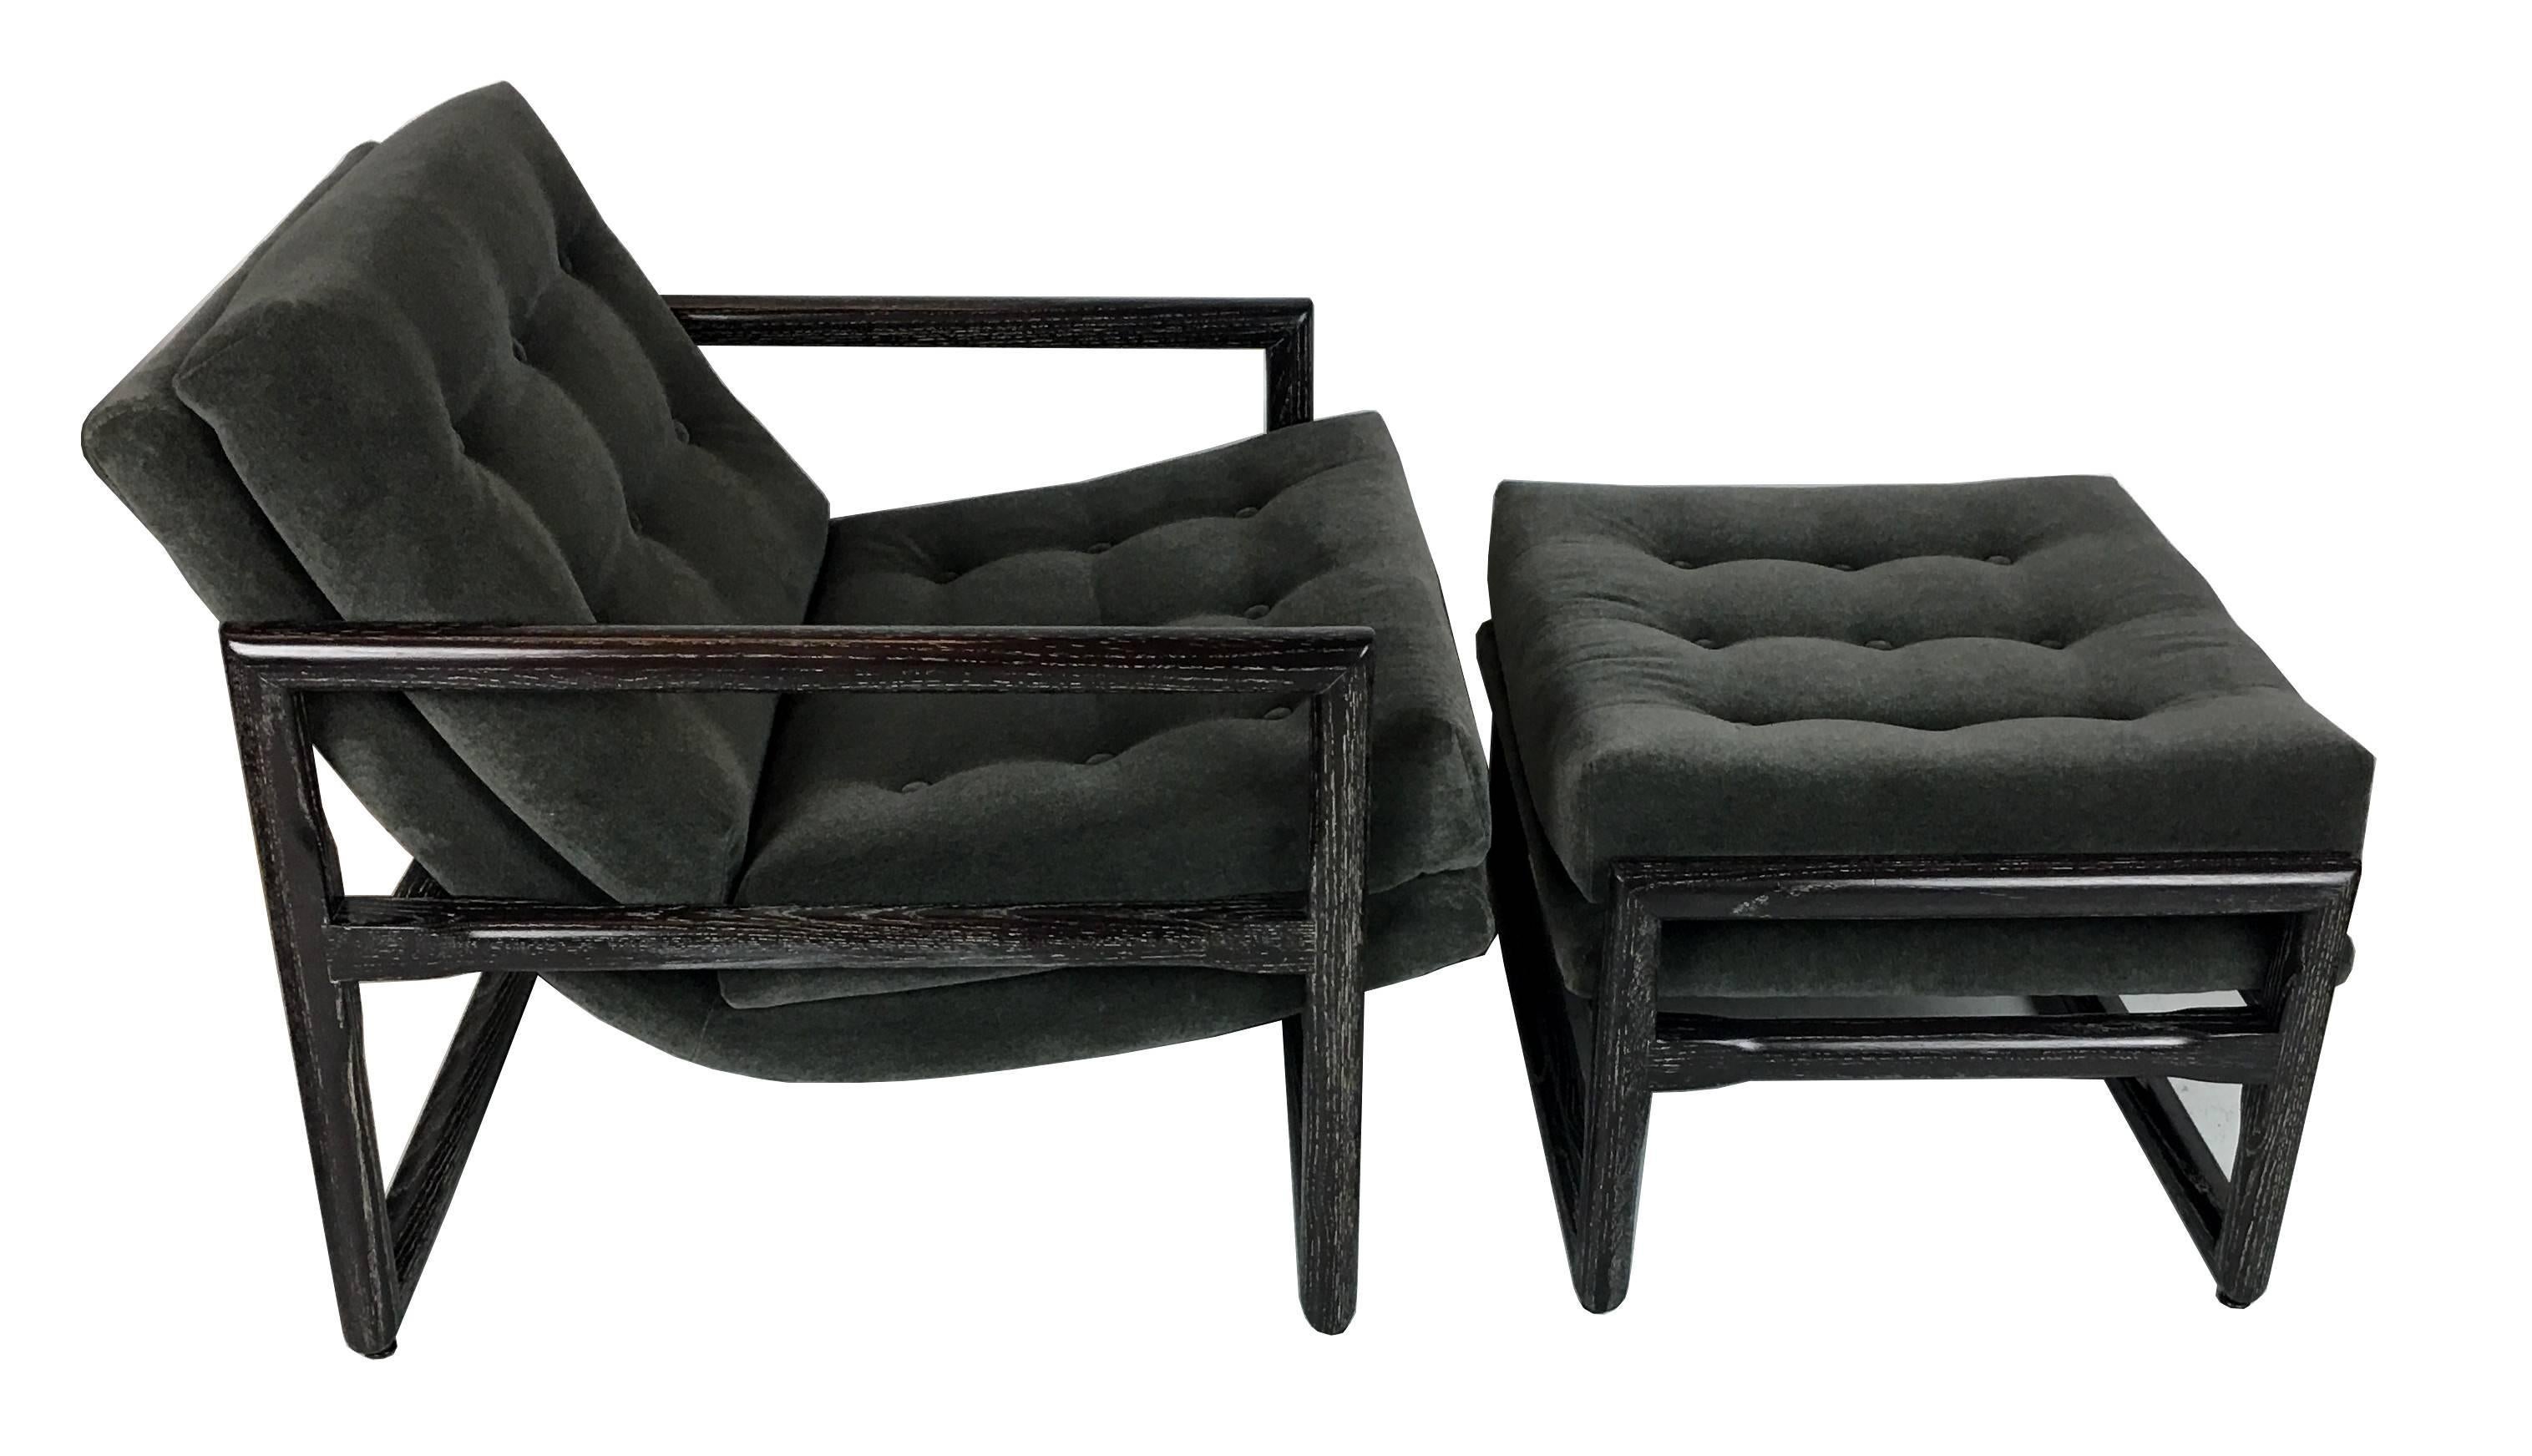 Exposed cerused oak frame Scoop chair and ottoman freshly reupholstered in luxurious heavyweight velvet. The frame has been meticulously refinished in dark brown with antiqued ceruse grain.  We refinish all of our pieces at our in-house facility